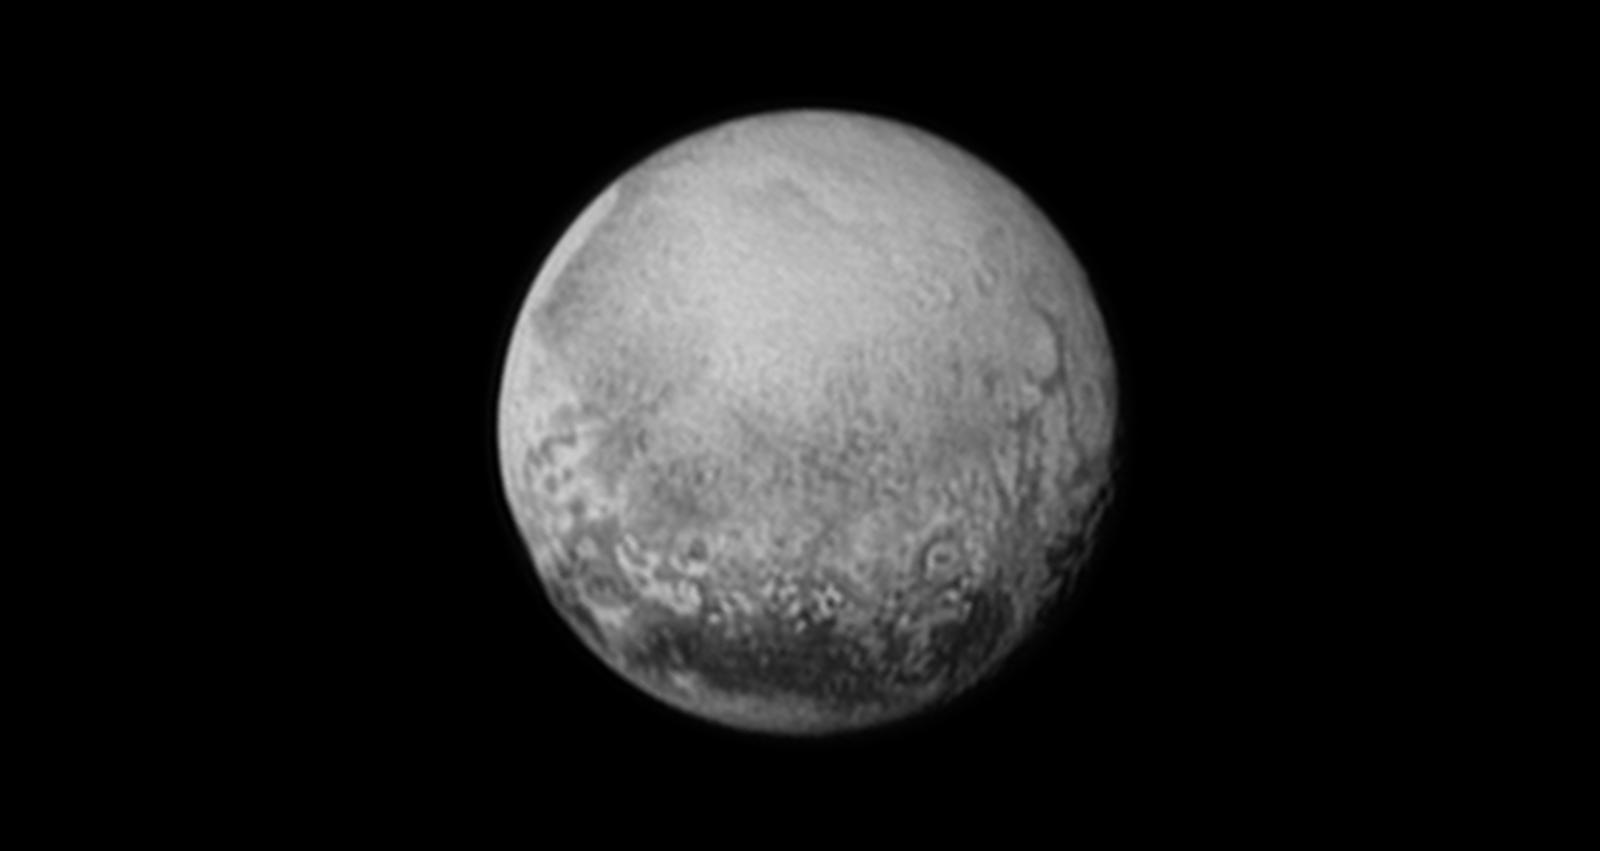 Tomorrow's historic flyby of the dwarf planet Pluto and its binary companion, Charon, will mark the completion of humanity's first-time exploration of each of the Solar System's nine traditional planets. Photo Credit: NASA